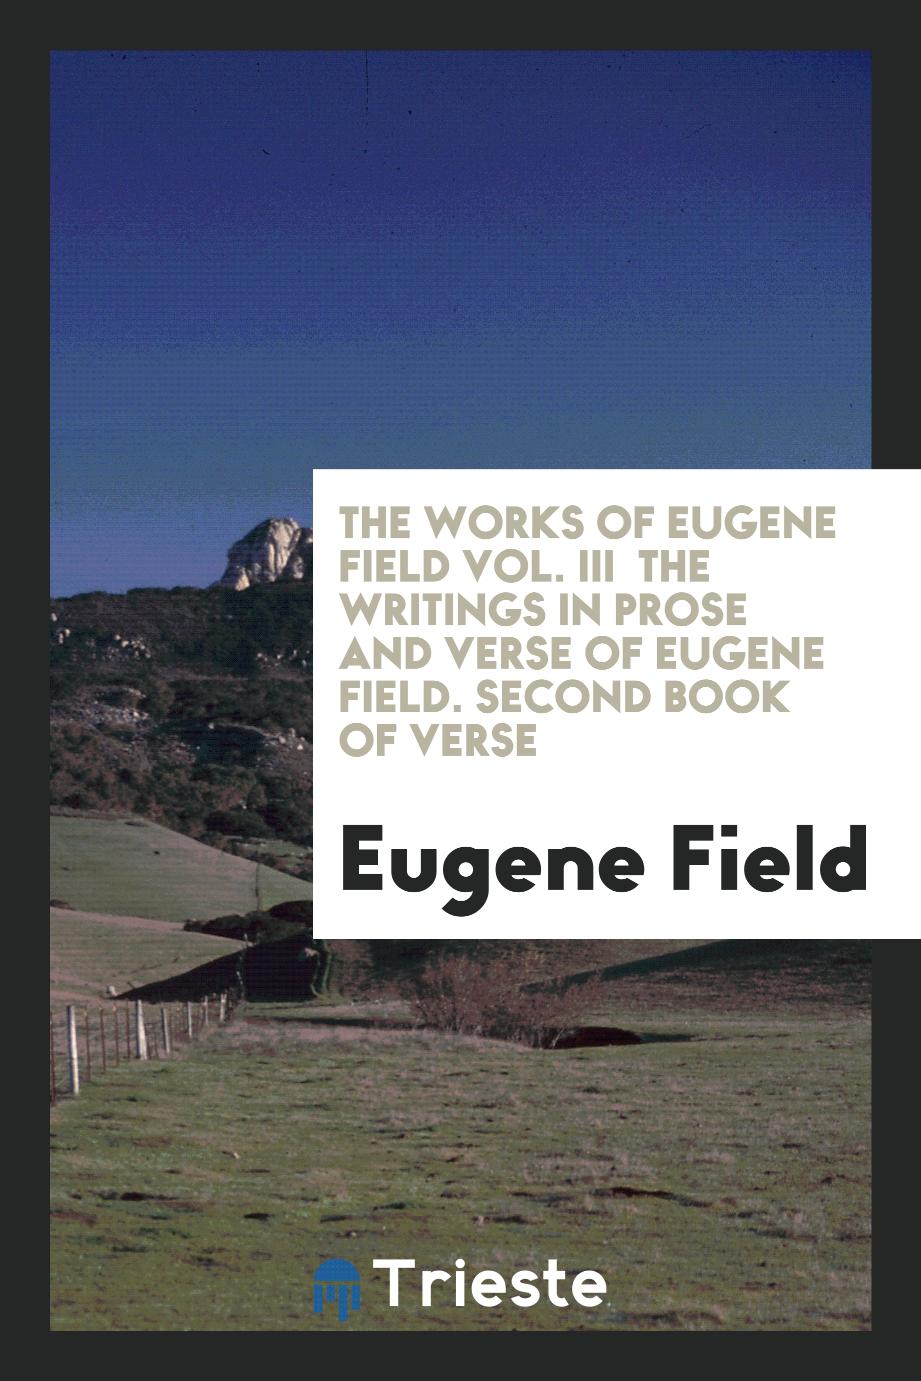 The Works of Eugene Field Vol. III The Writings in Prose and Verse of Eugene Field. Second Book of Verse